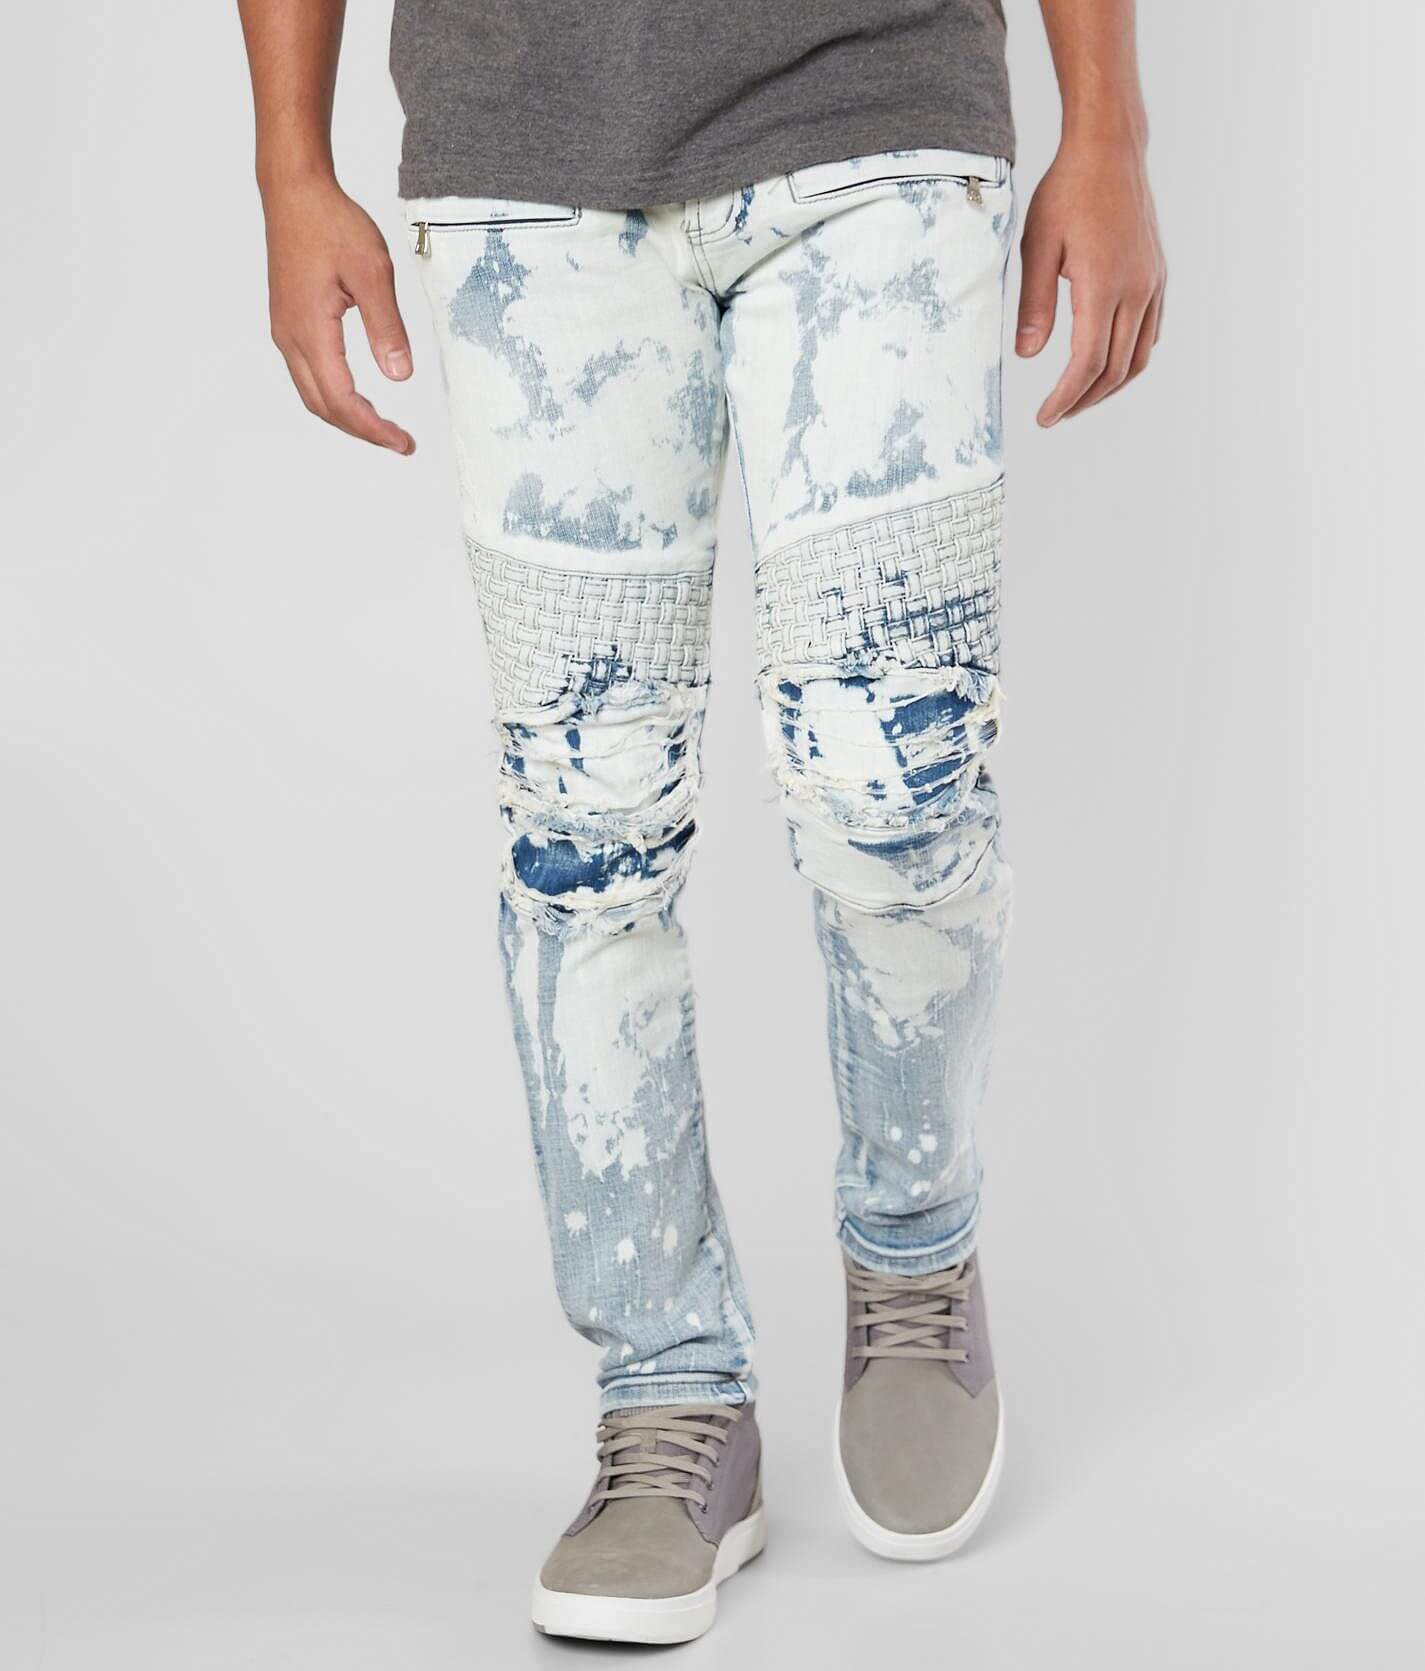 bleached jeans mens